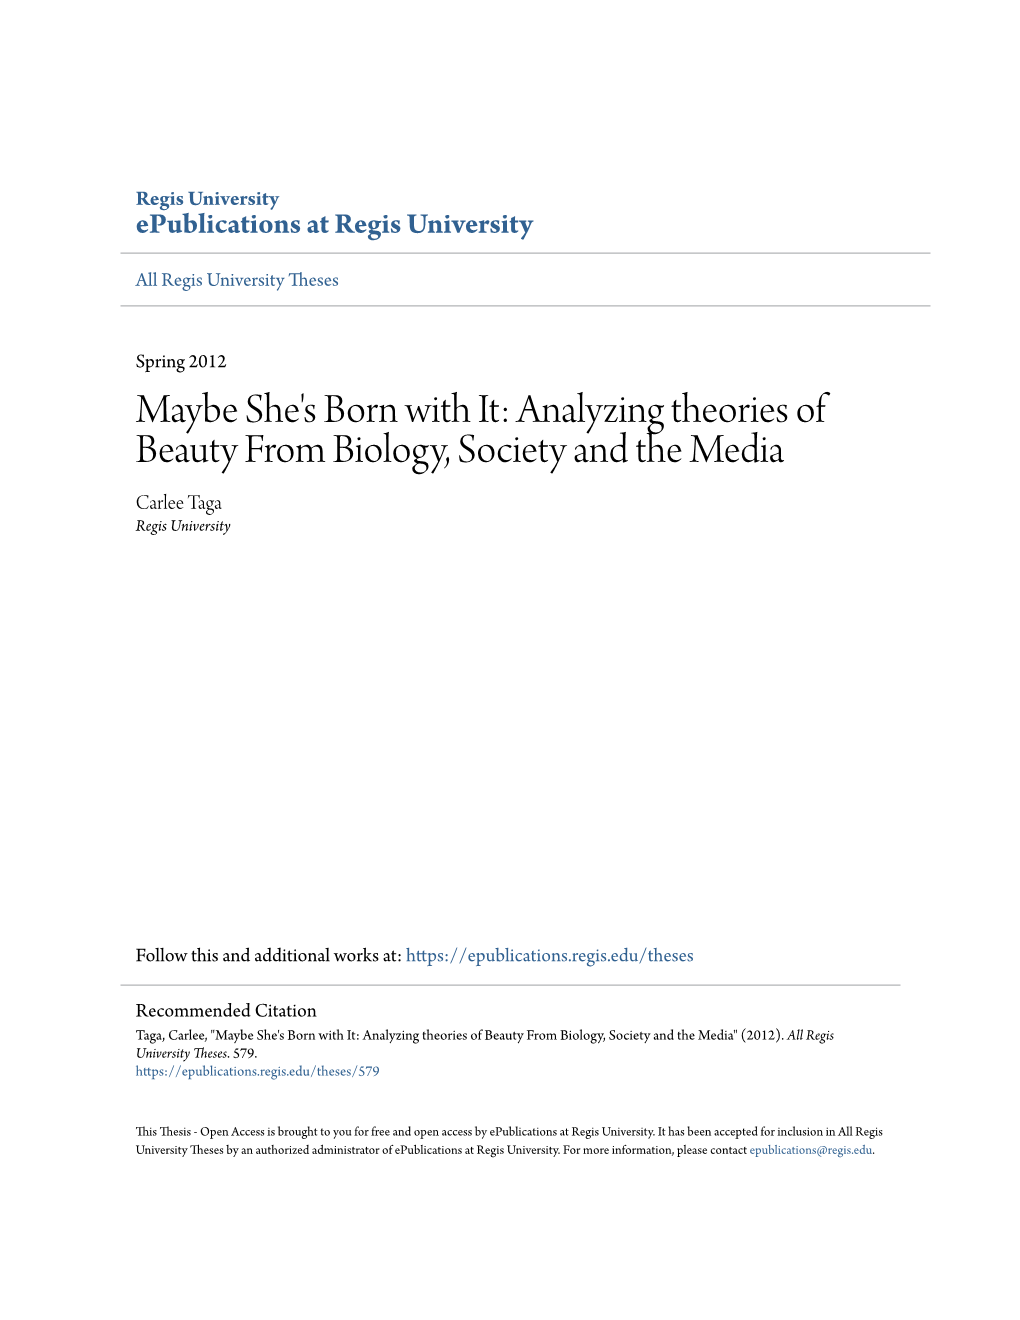 Analyzing Theories of Beauty from Biology, Society and the Media Carlee Taga Regis University